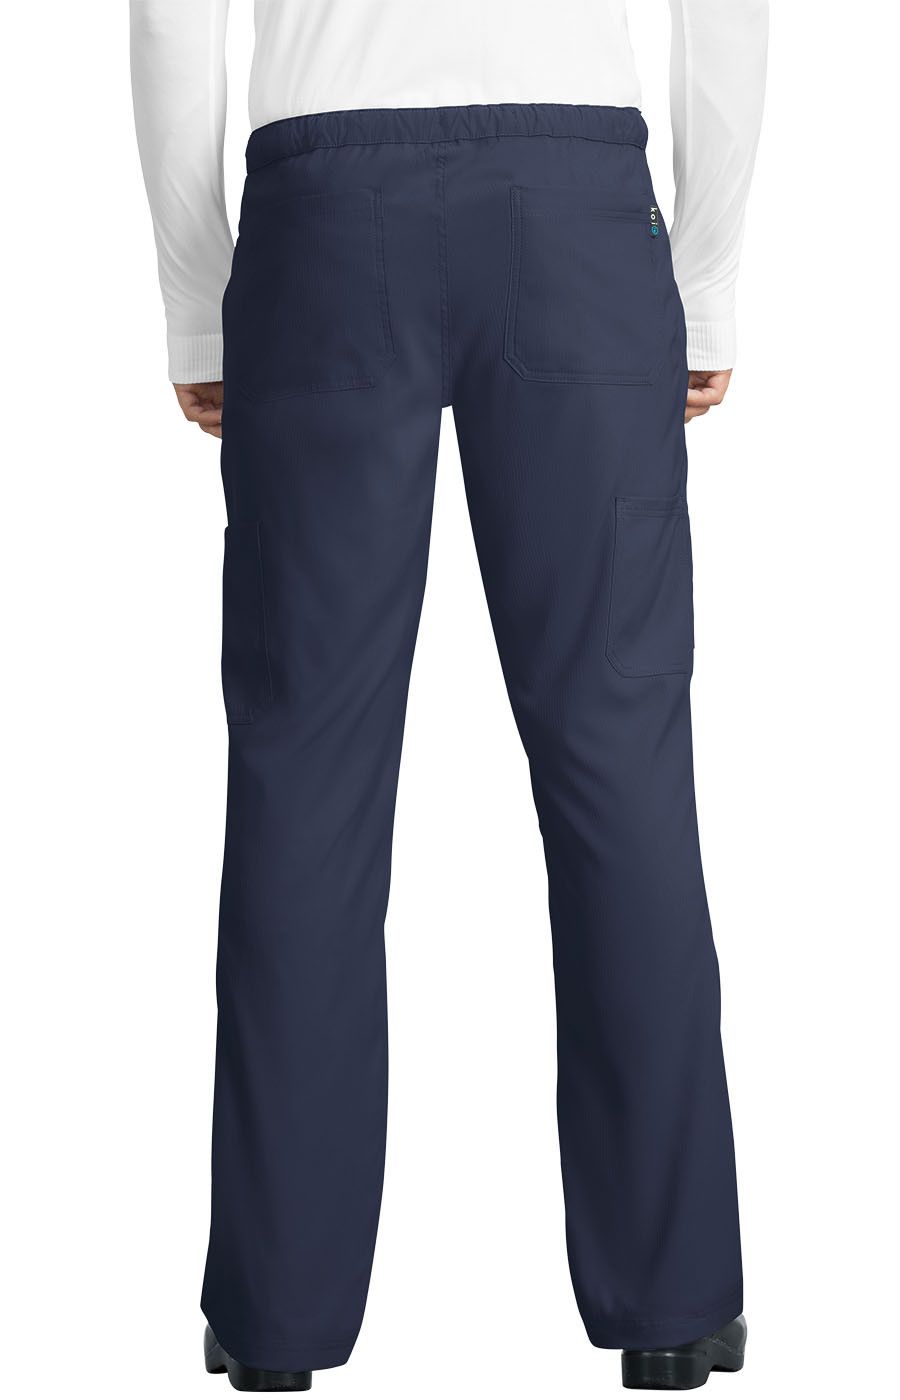 discovery-pant-navy